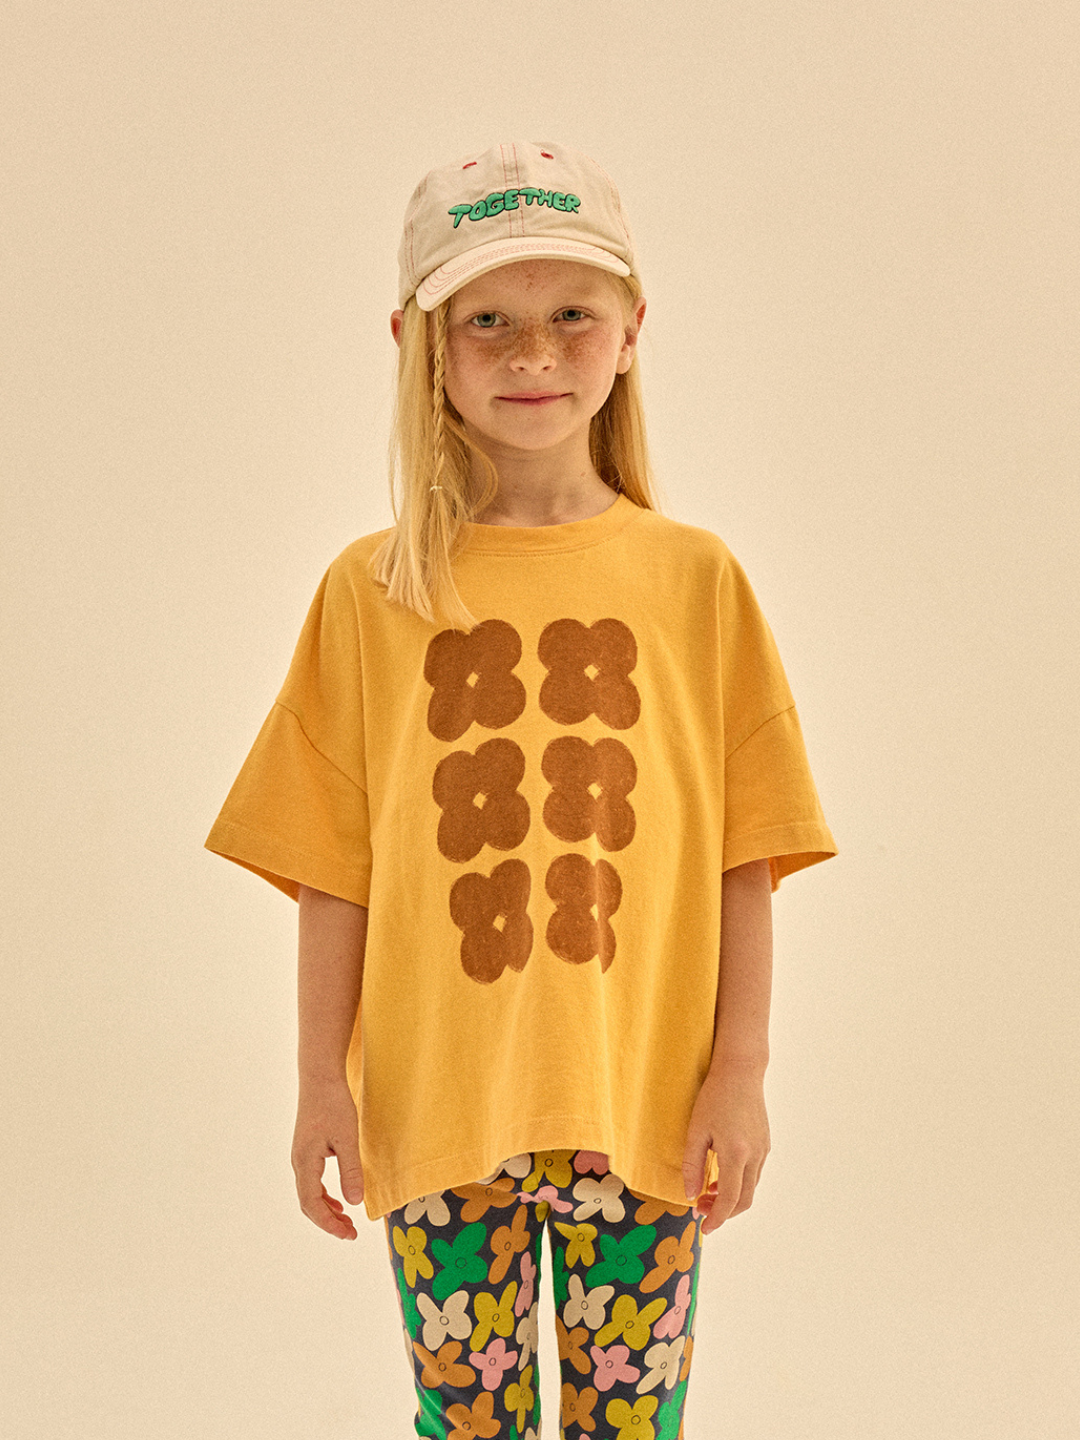 Child wearing Clover Tshirt in Yellow